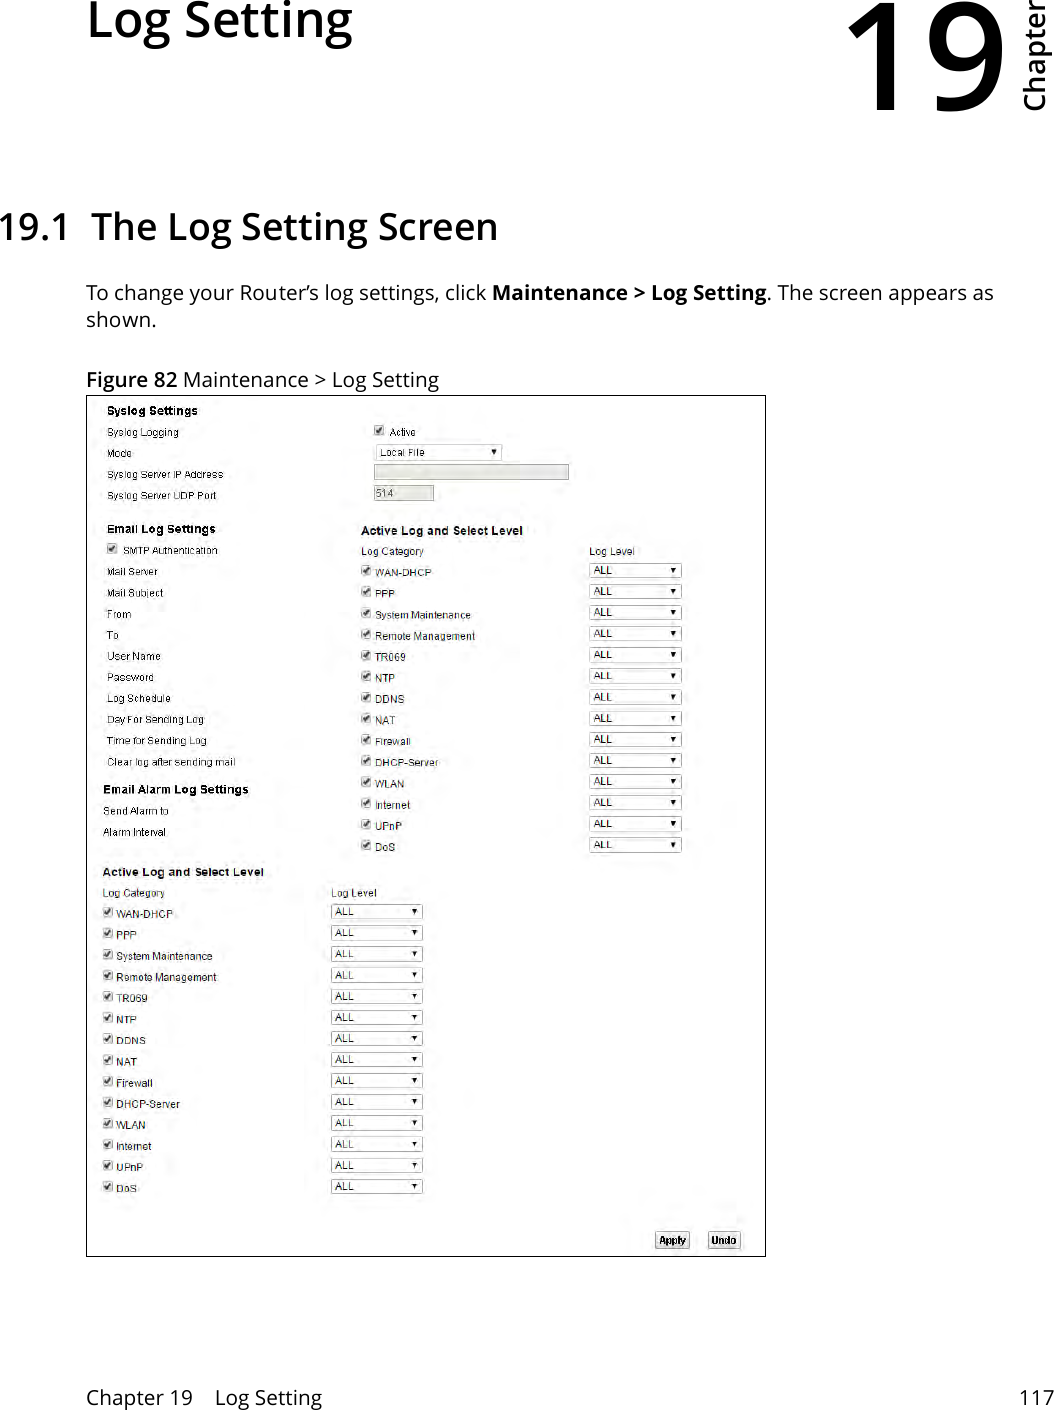 19Chapter Chapter 19    Log Setting 117CHAPTER 19 Chapter 19 Log Setting 19.1  The Log Setting ScreenTo change your Router’s log settings, click Maintenance &gt; Log Setting. The screen appears as shown.Figure 82 Maintenance &gt; Log Setting